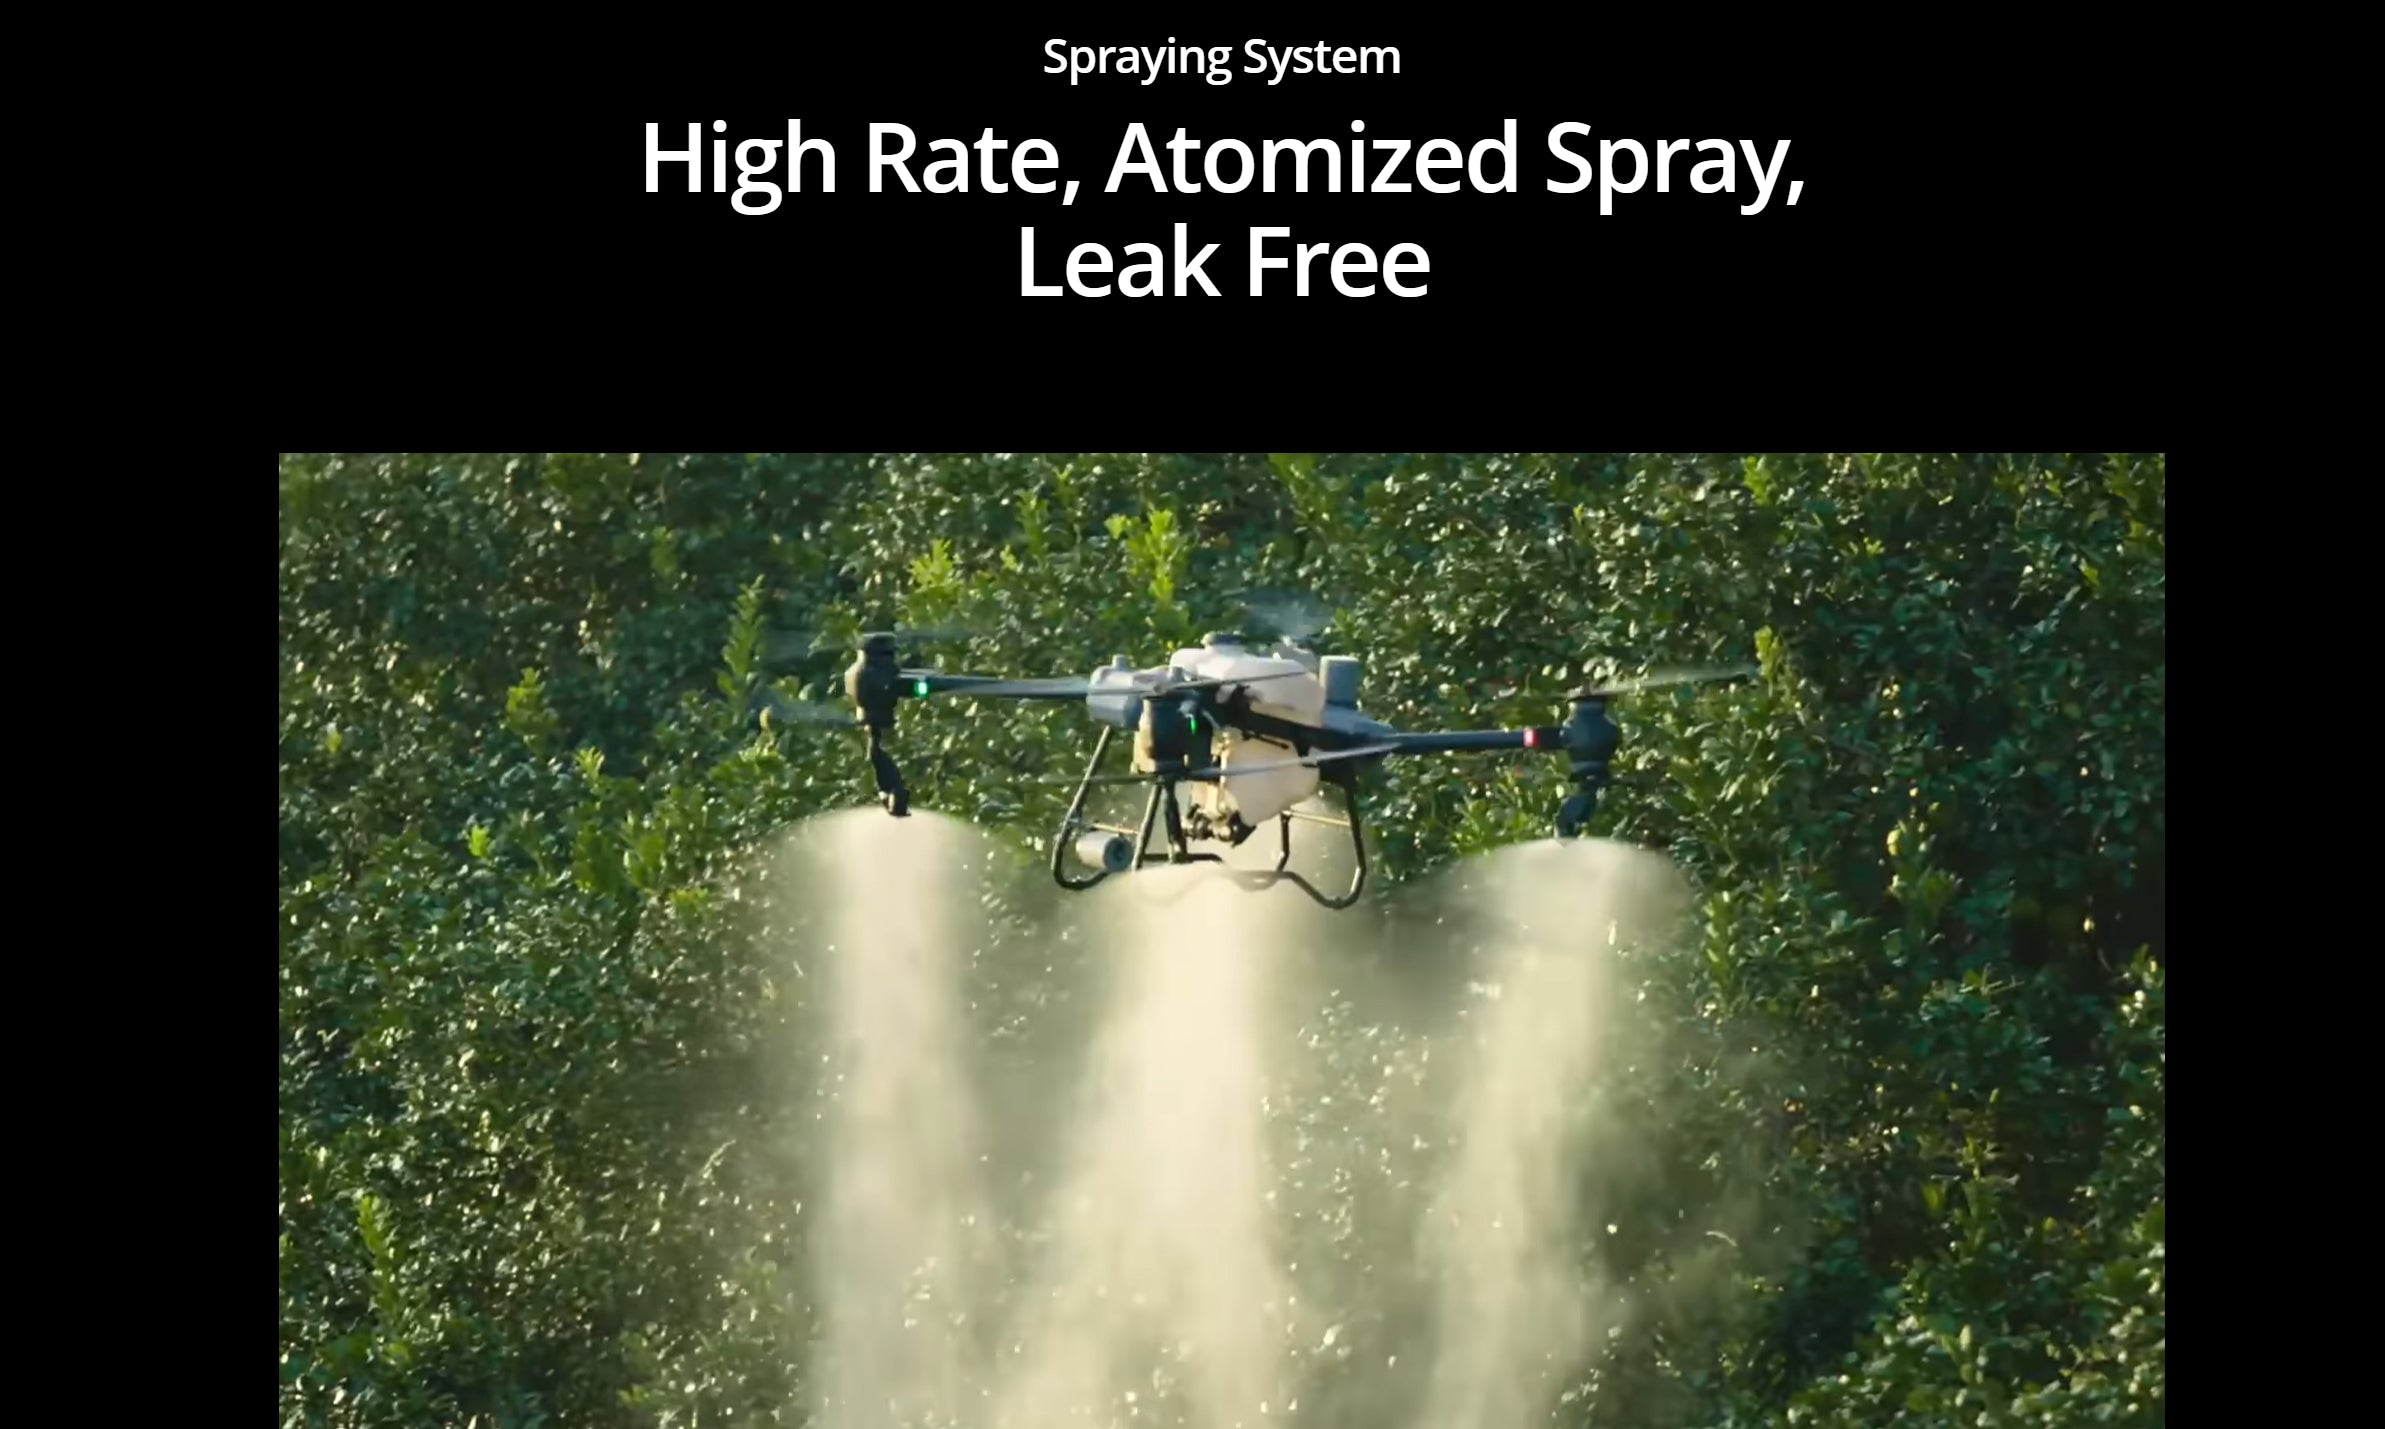 DJI Agras T50 , High-rate atomized spraying with leak-free design for efficient and precise application.